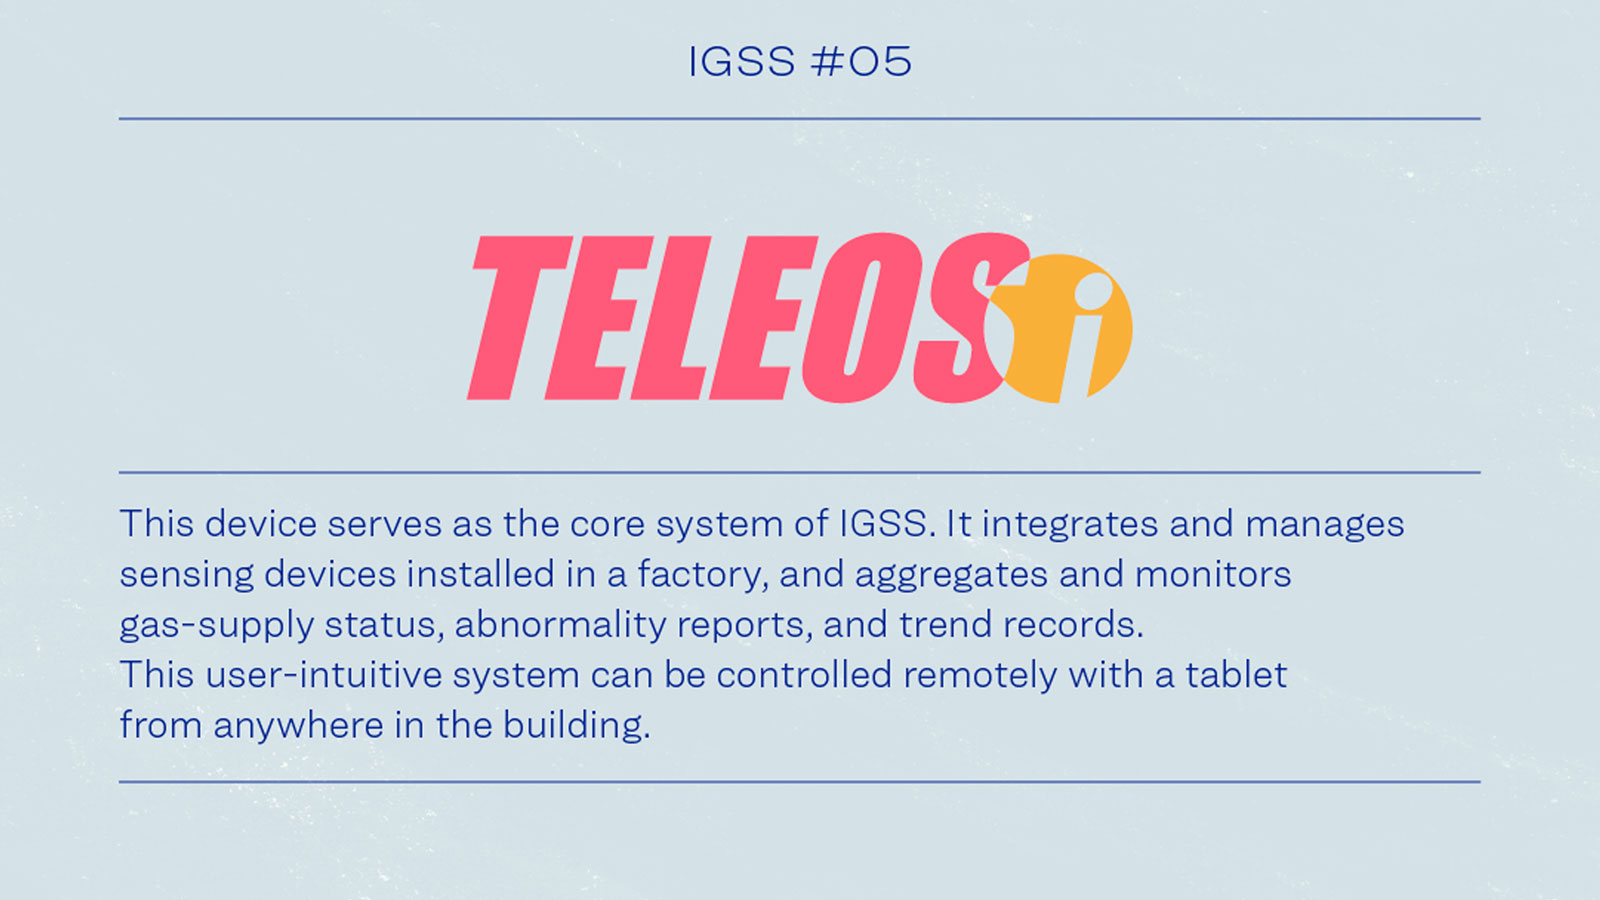 IGSS #05 TELEOSi This device serves as the core system of IGSS. It integrates and manages sensing devices installed in a factory, and aggregates and monitors gas-supply status, abnormality reports, and trends records.This user-intuitive system can be controlled remotely with tablet from anywhere in the building.